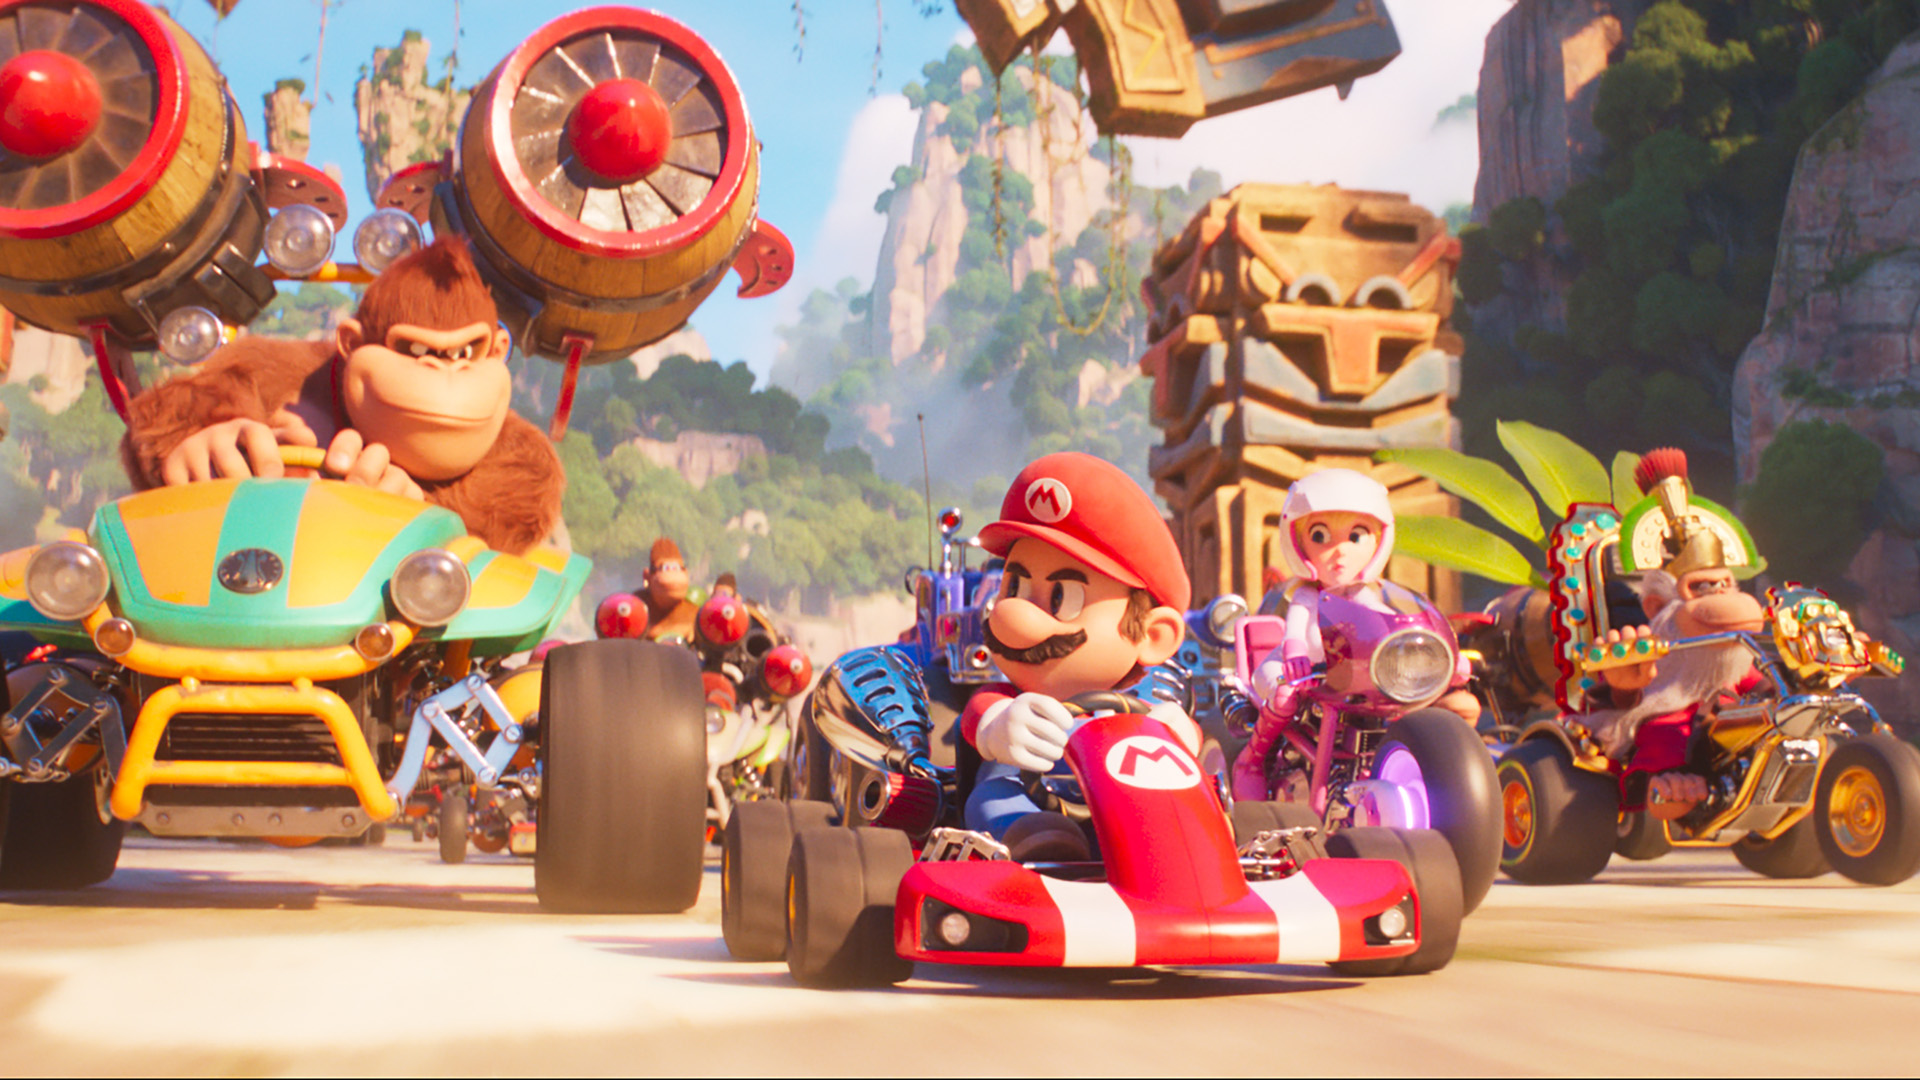 Mario, Peach, Donkey Kong, Toad, and Kranky Kong ride their karts in The Super Mario Bros. Movie